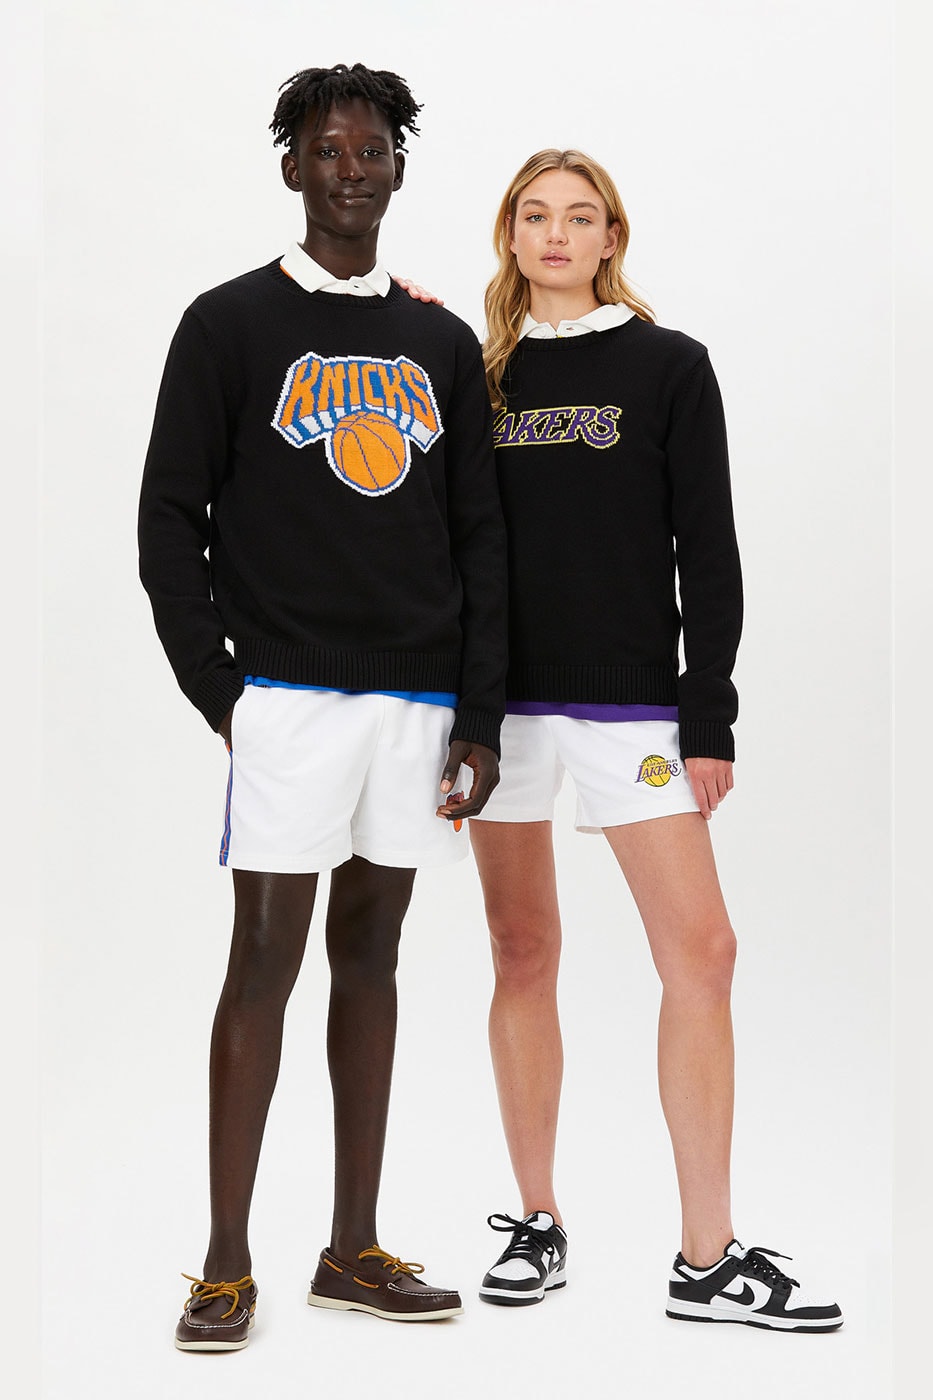 Rowing Blazers Celebrates the Start of the NBA Season With Second Capsule Collaboration